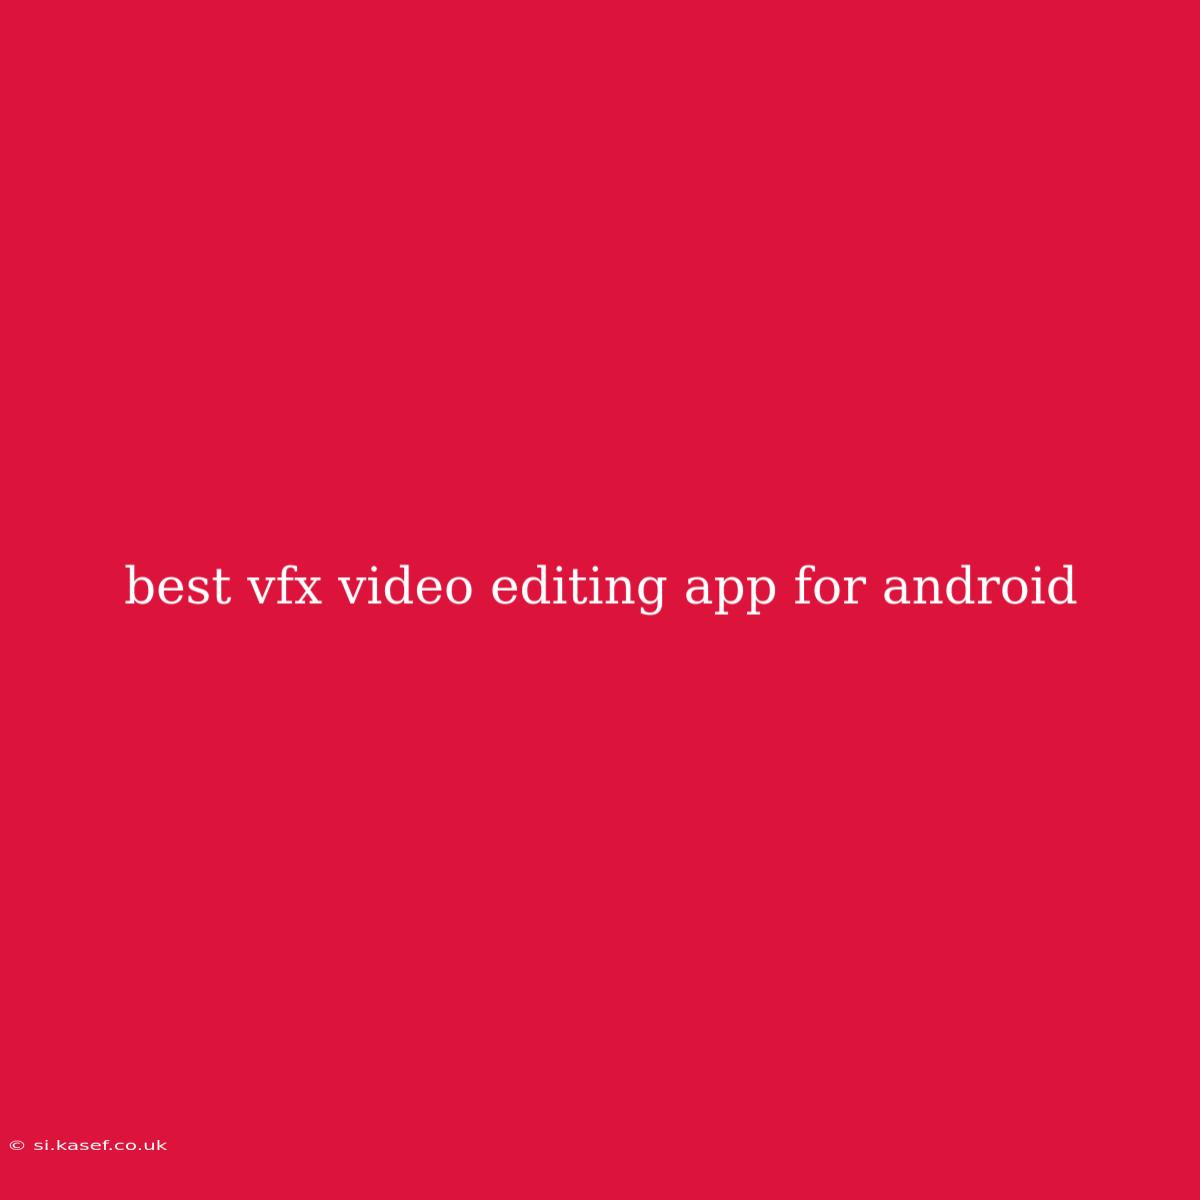 Best Vfx Video Editing App For Android